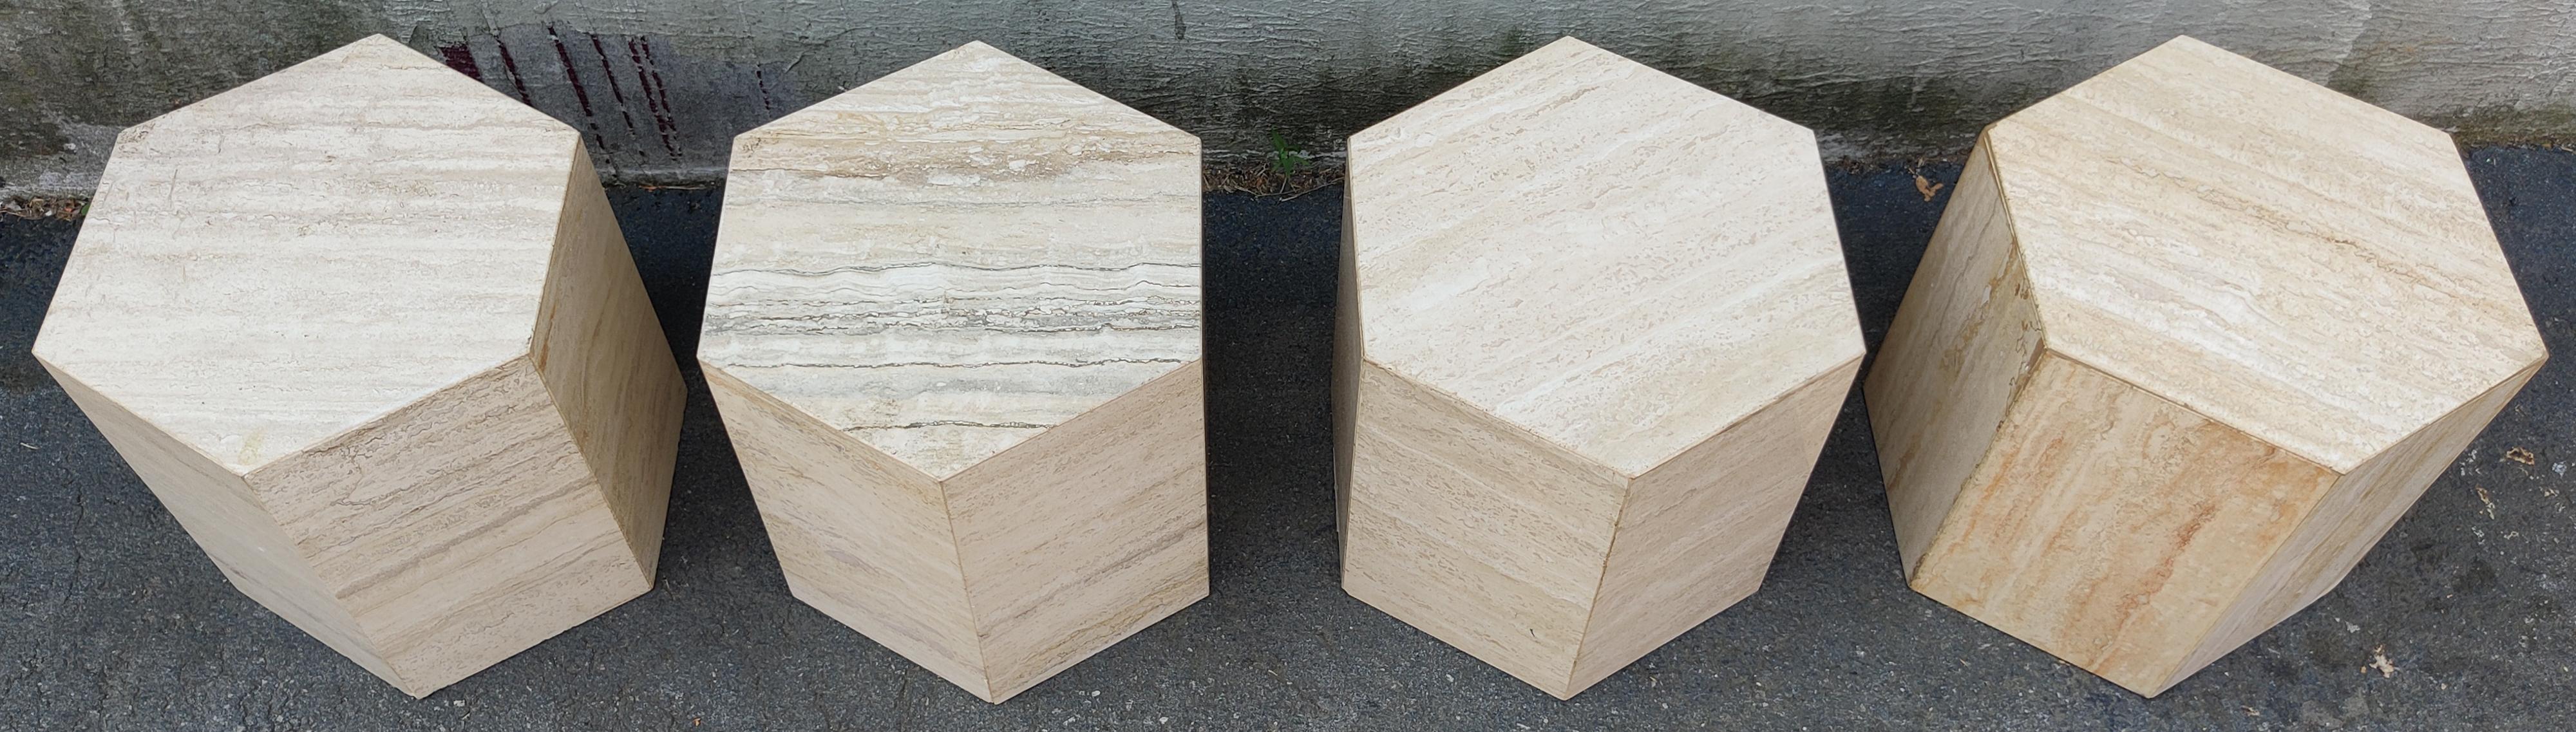 A set of four Italian travertine marble haxagonal side tables or pedestals. The polished travertine is beige and cream colored with beautiful variation. Notice in some areas the grain develops a red or rust-colored hue, which adds to its beauty and